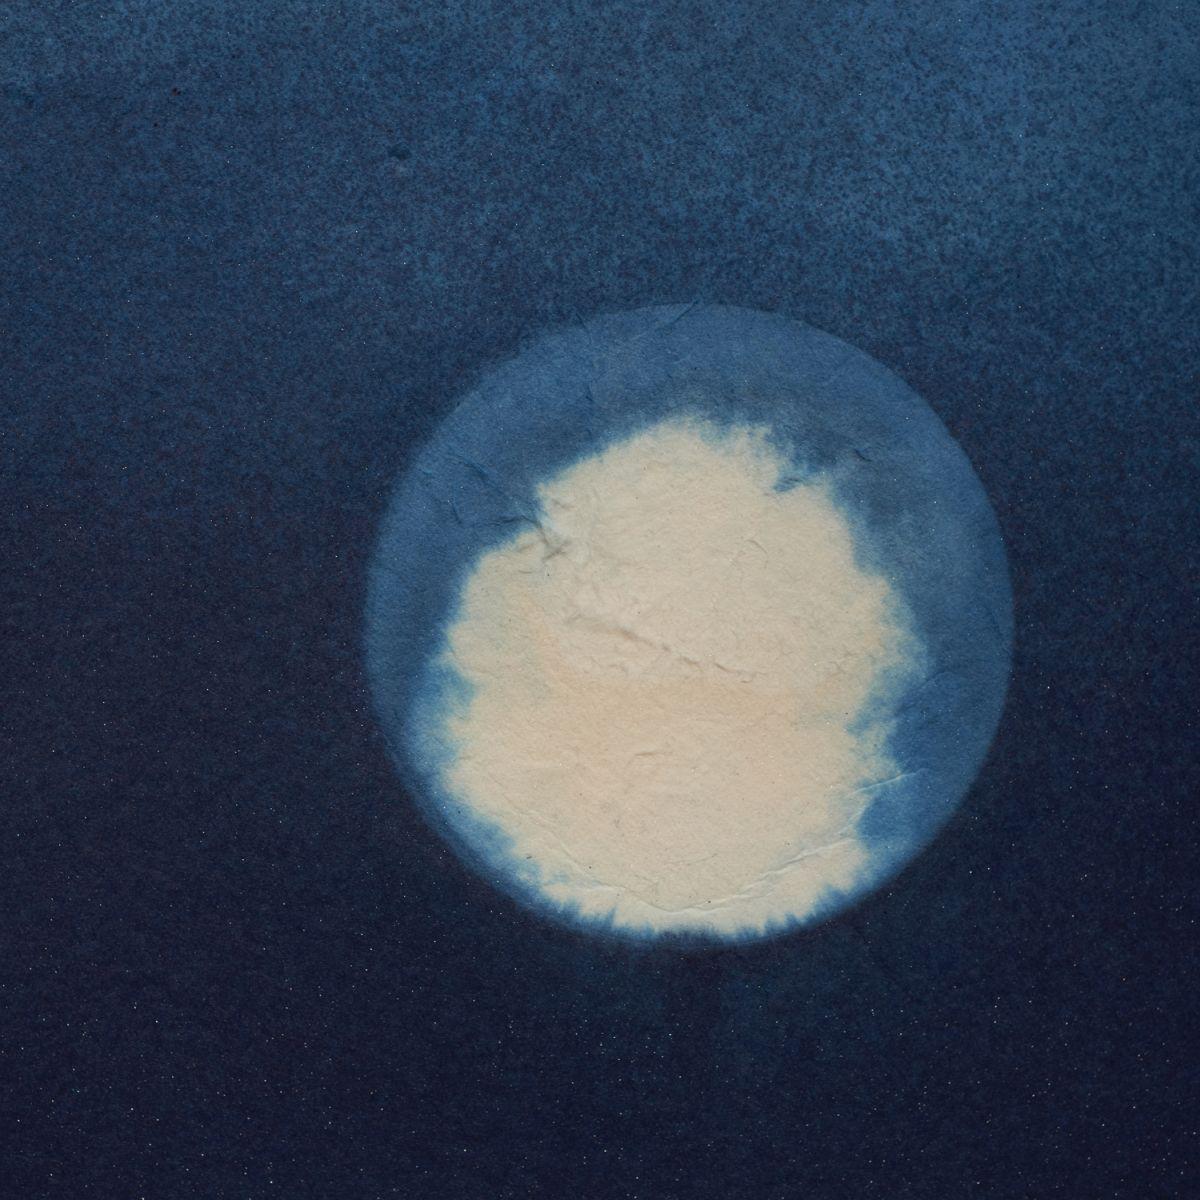 Miya Ando
The Moon Goes Down To The West Mountains (Tsukiwaseizanniotsu), 2023
Natural indigo & micronized pure silver on Kozo paper
39 x 39 inches
MA1342

Miya Ando’s paintings, sculptures, and installation artworks have been the subject of recent